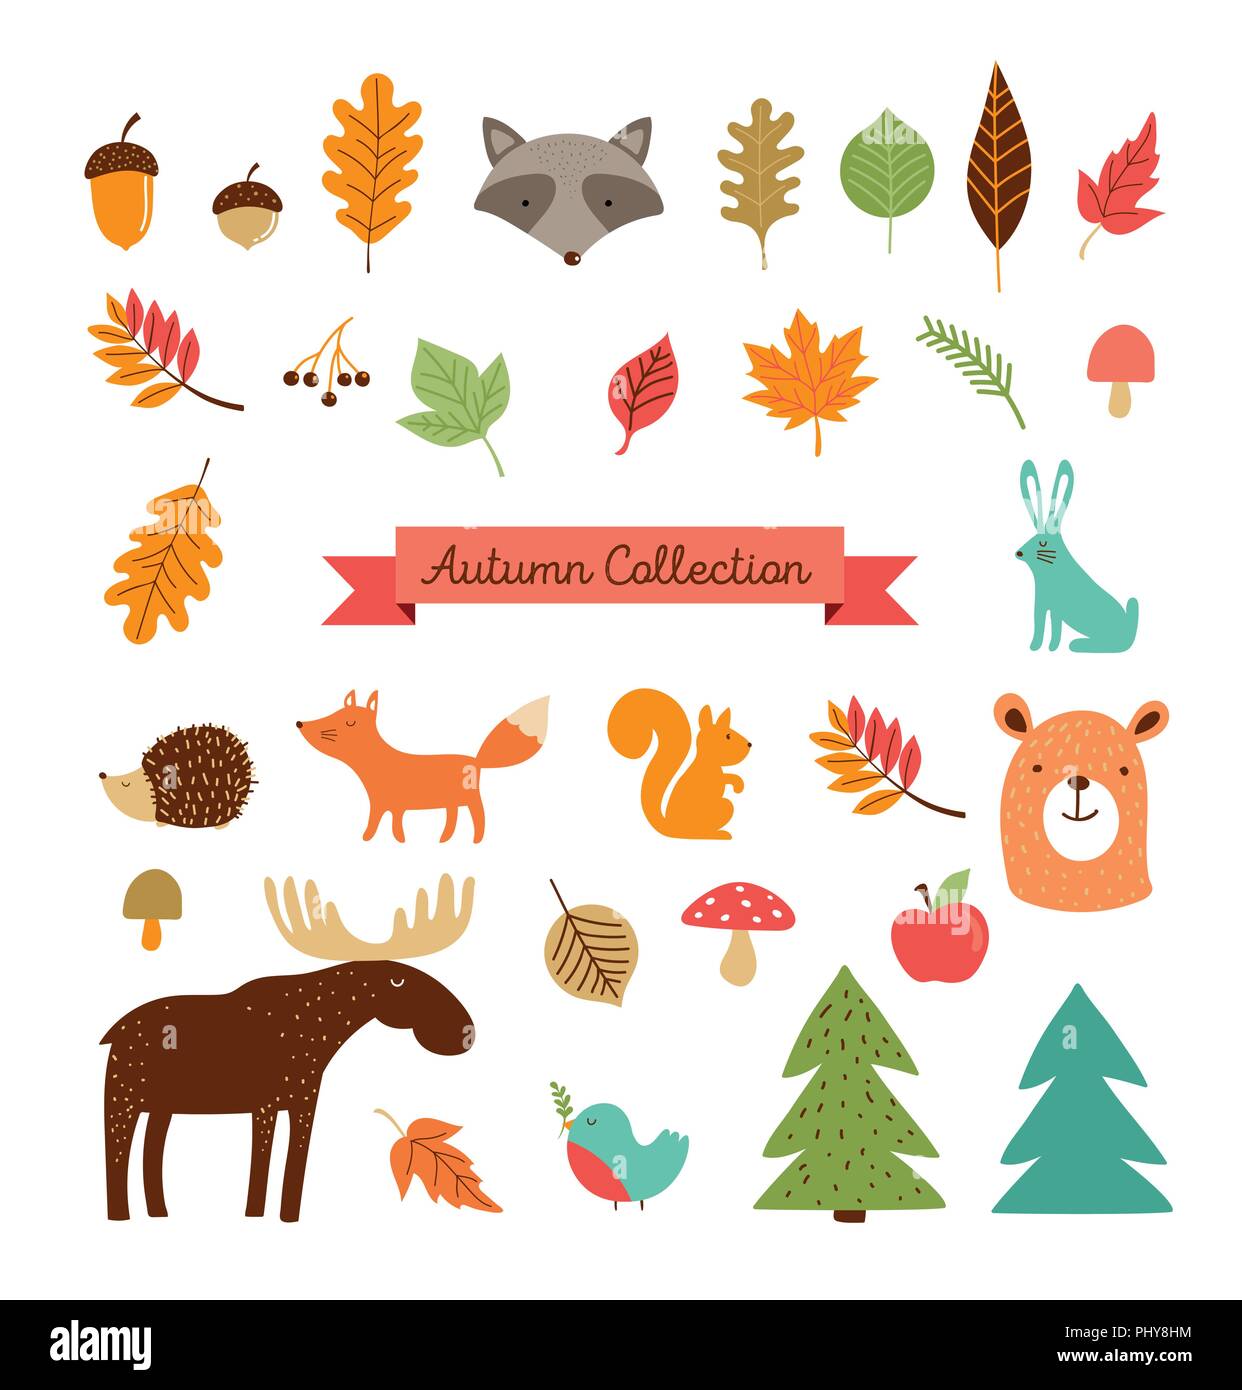 Hello Autumn, fall season collection of forest animals, elements and ...